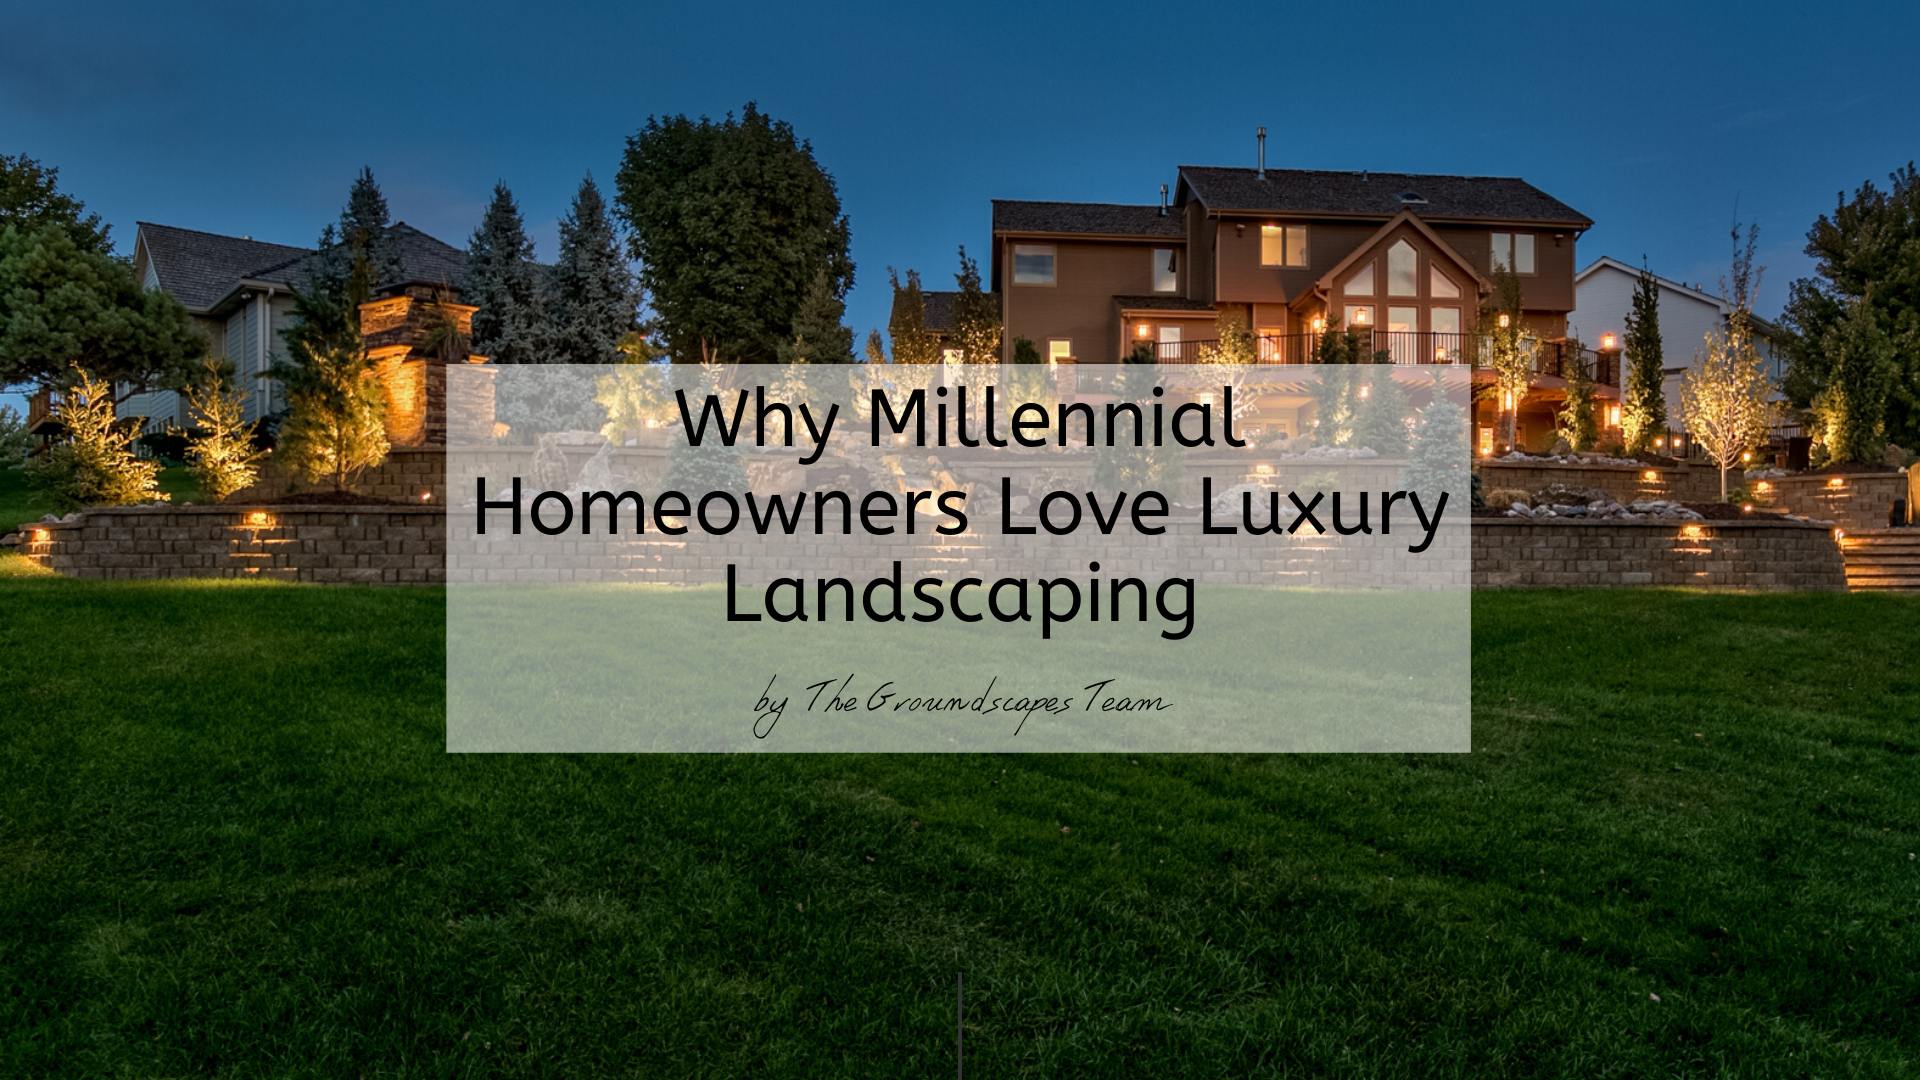 Why Millennial Homeowners Love Luxury Landscaping